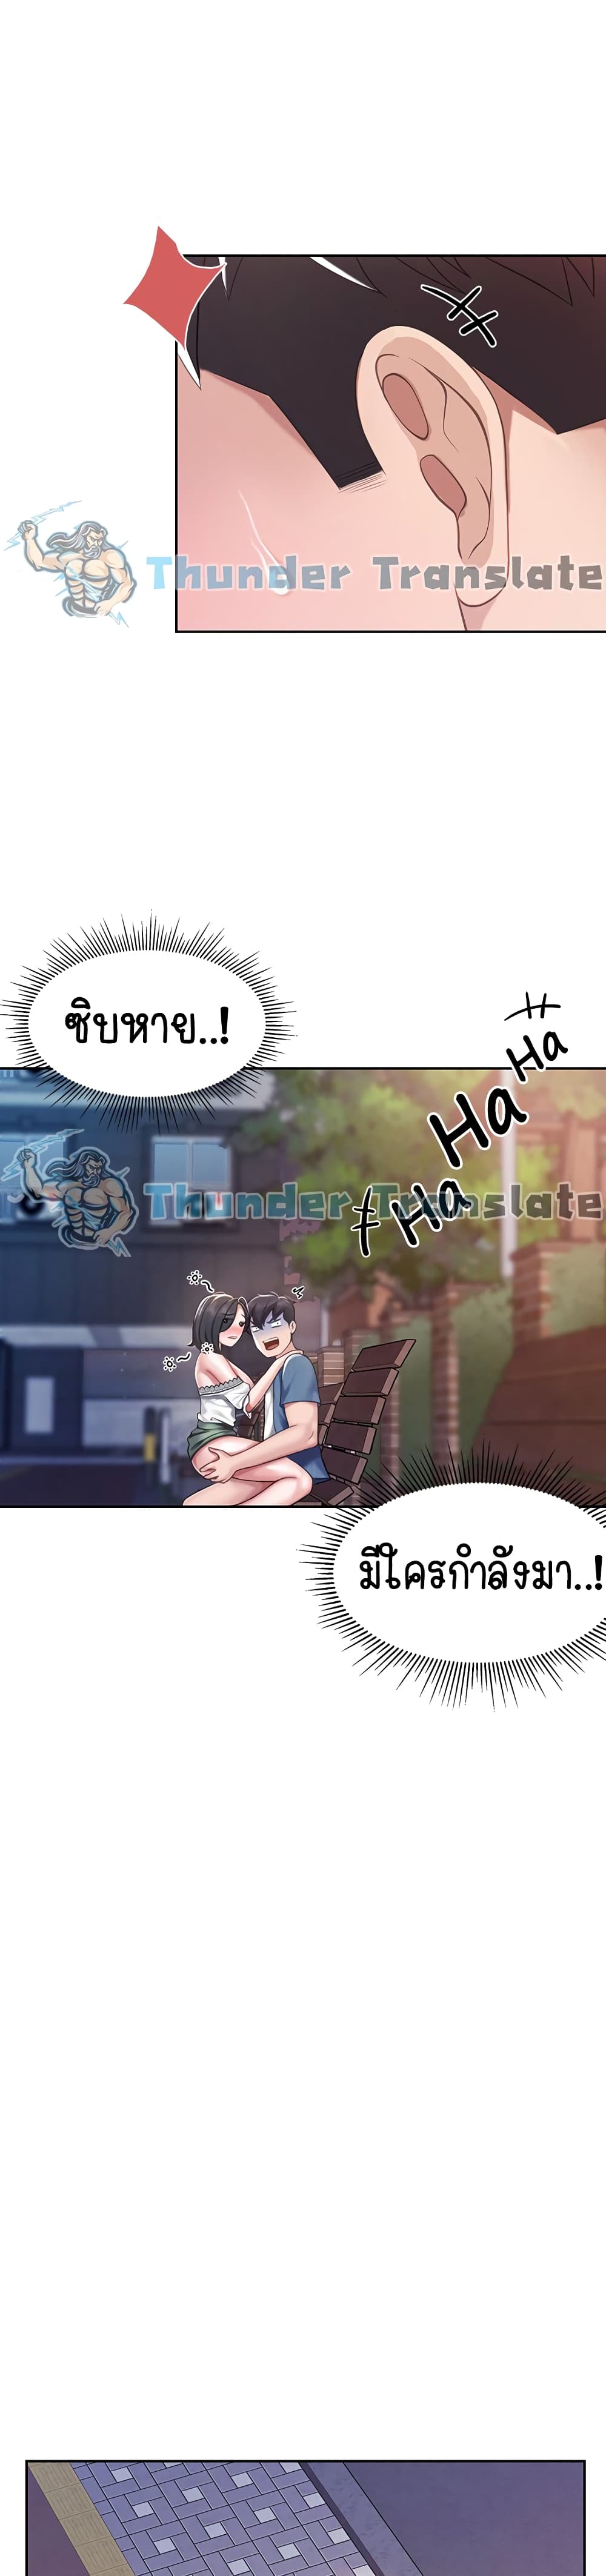 Welcome To Kids Cafe’ 10 ภาพ 20